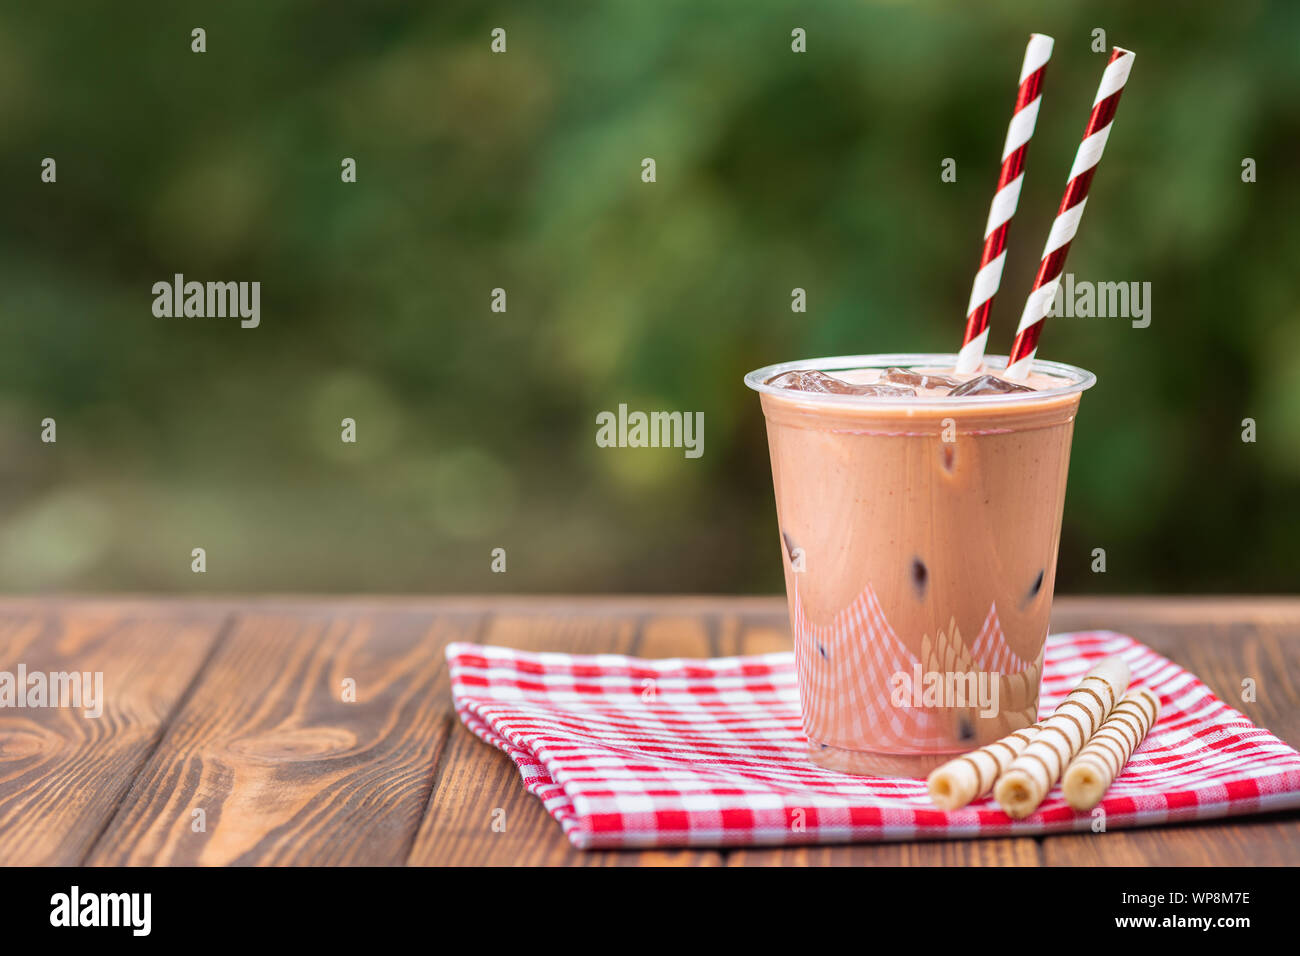 https://c8.alamy.com/comp/WP8M7E/ice-chocolate-milkshake-in-disposable-plastic-cup-with-wafer-rolls-on-wooden-table-outdoors-WP8M7E.jpg